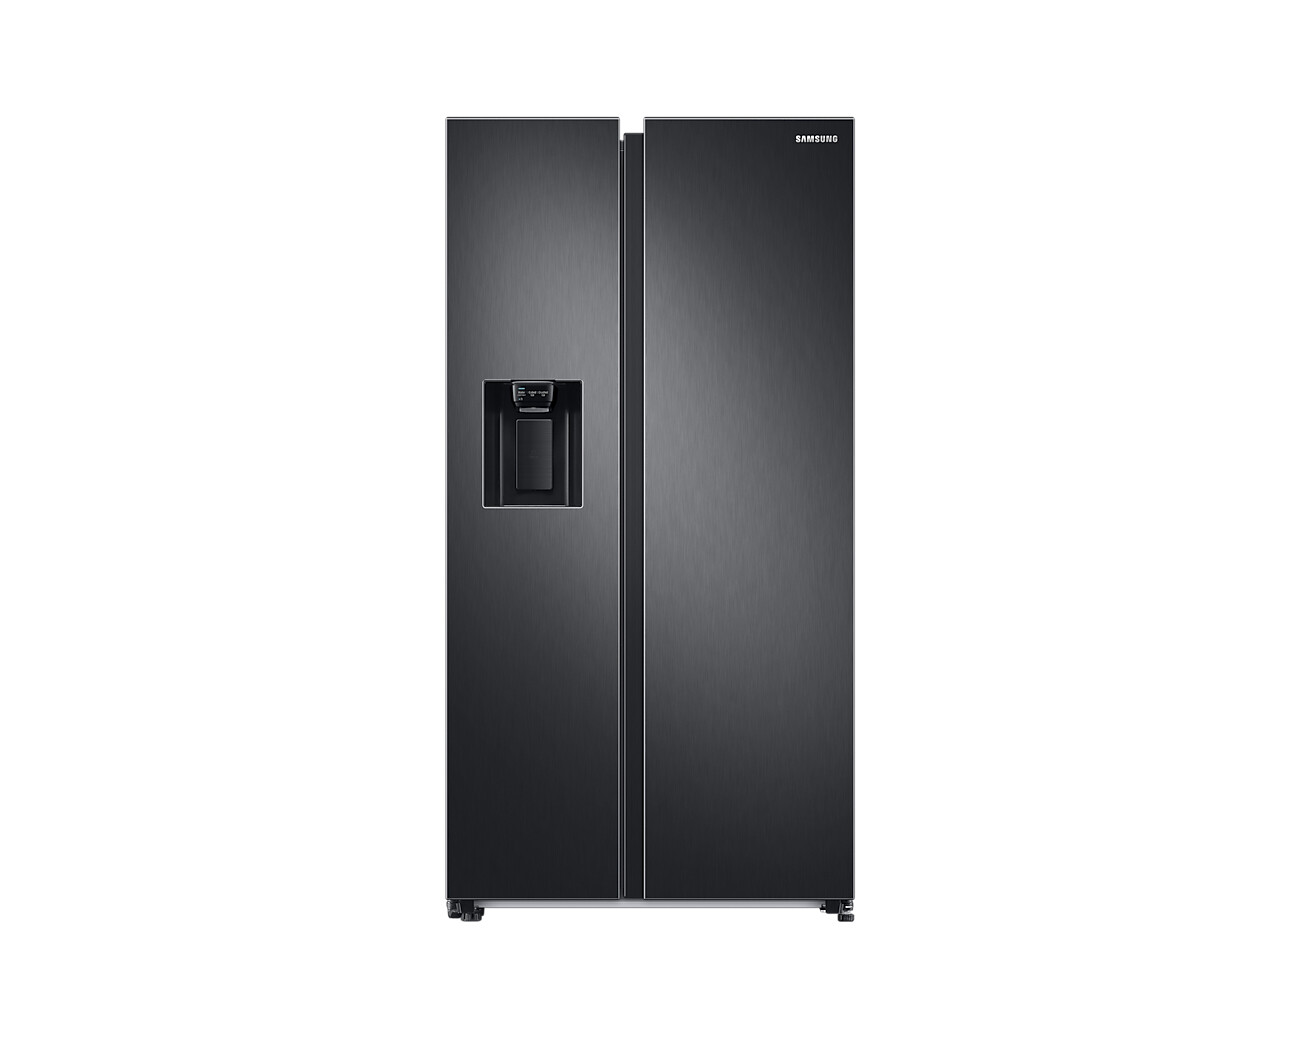 Samsung Series 8 RS68A884CB1 Plumbed Frost Free American Fridge Freezer – Black – C Rated #364837